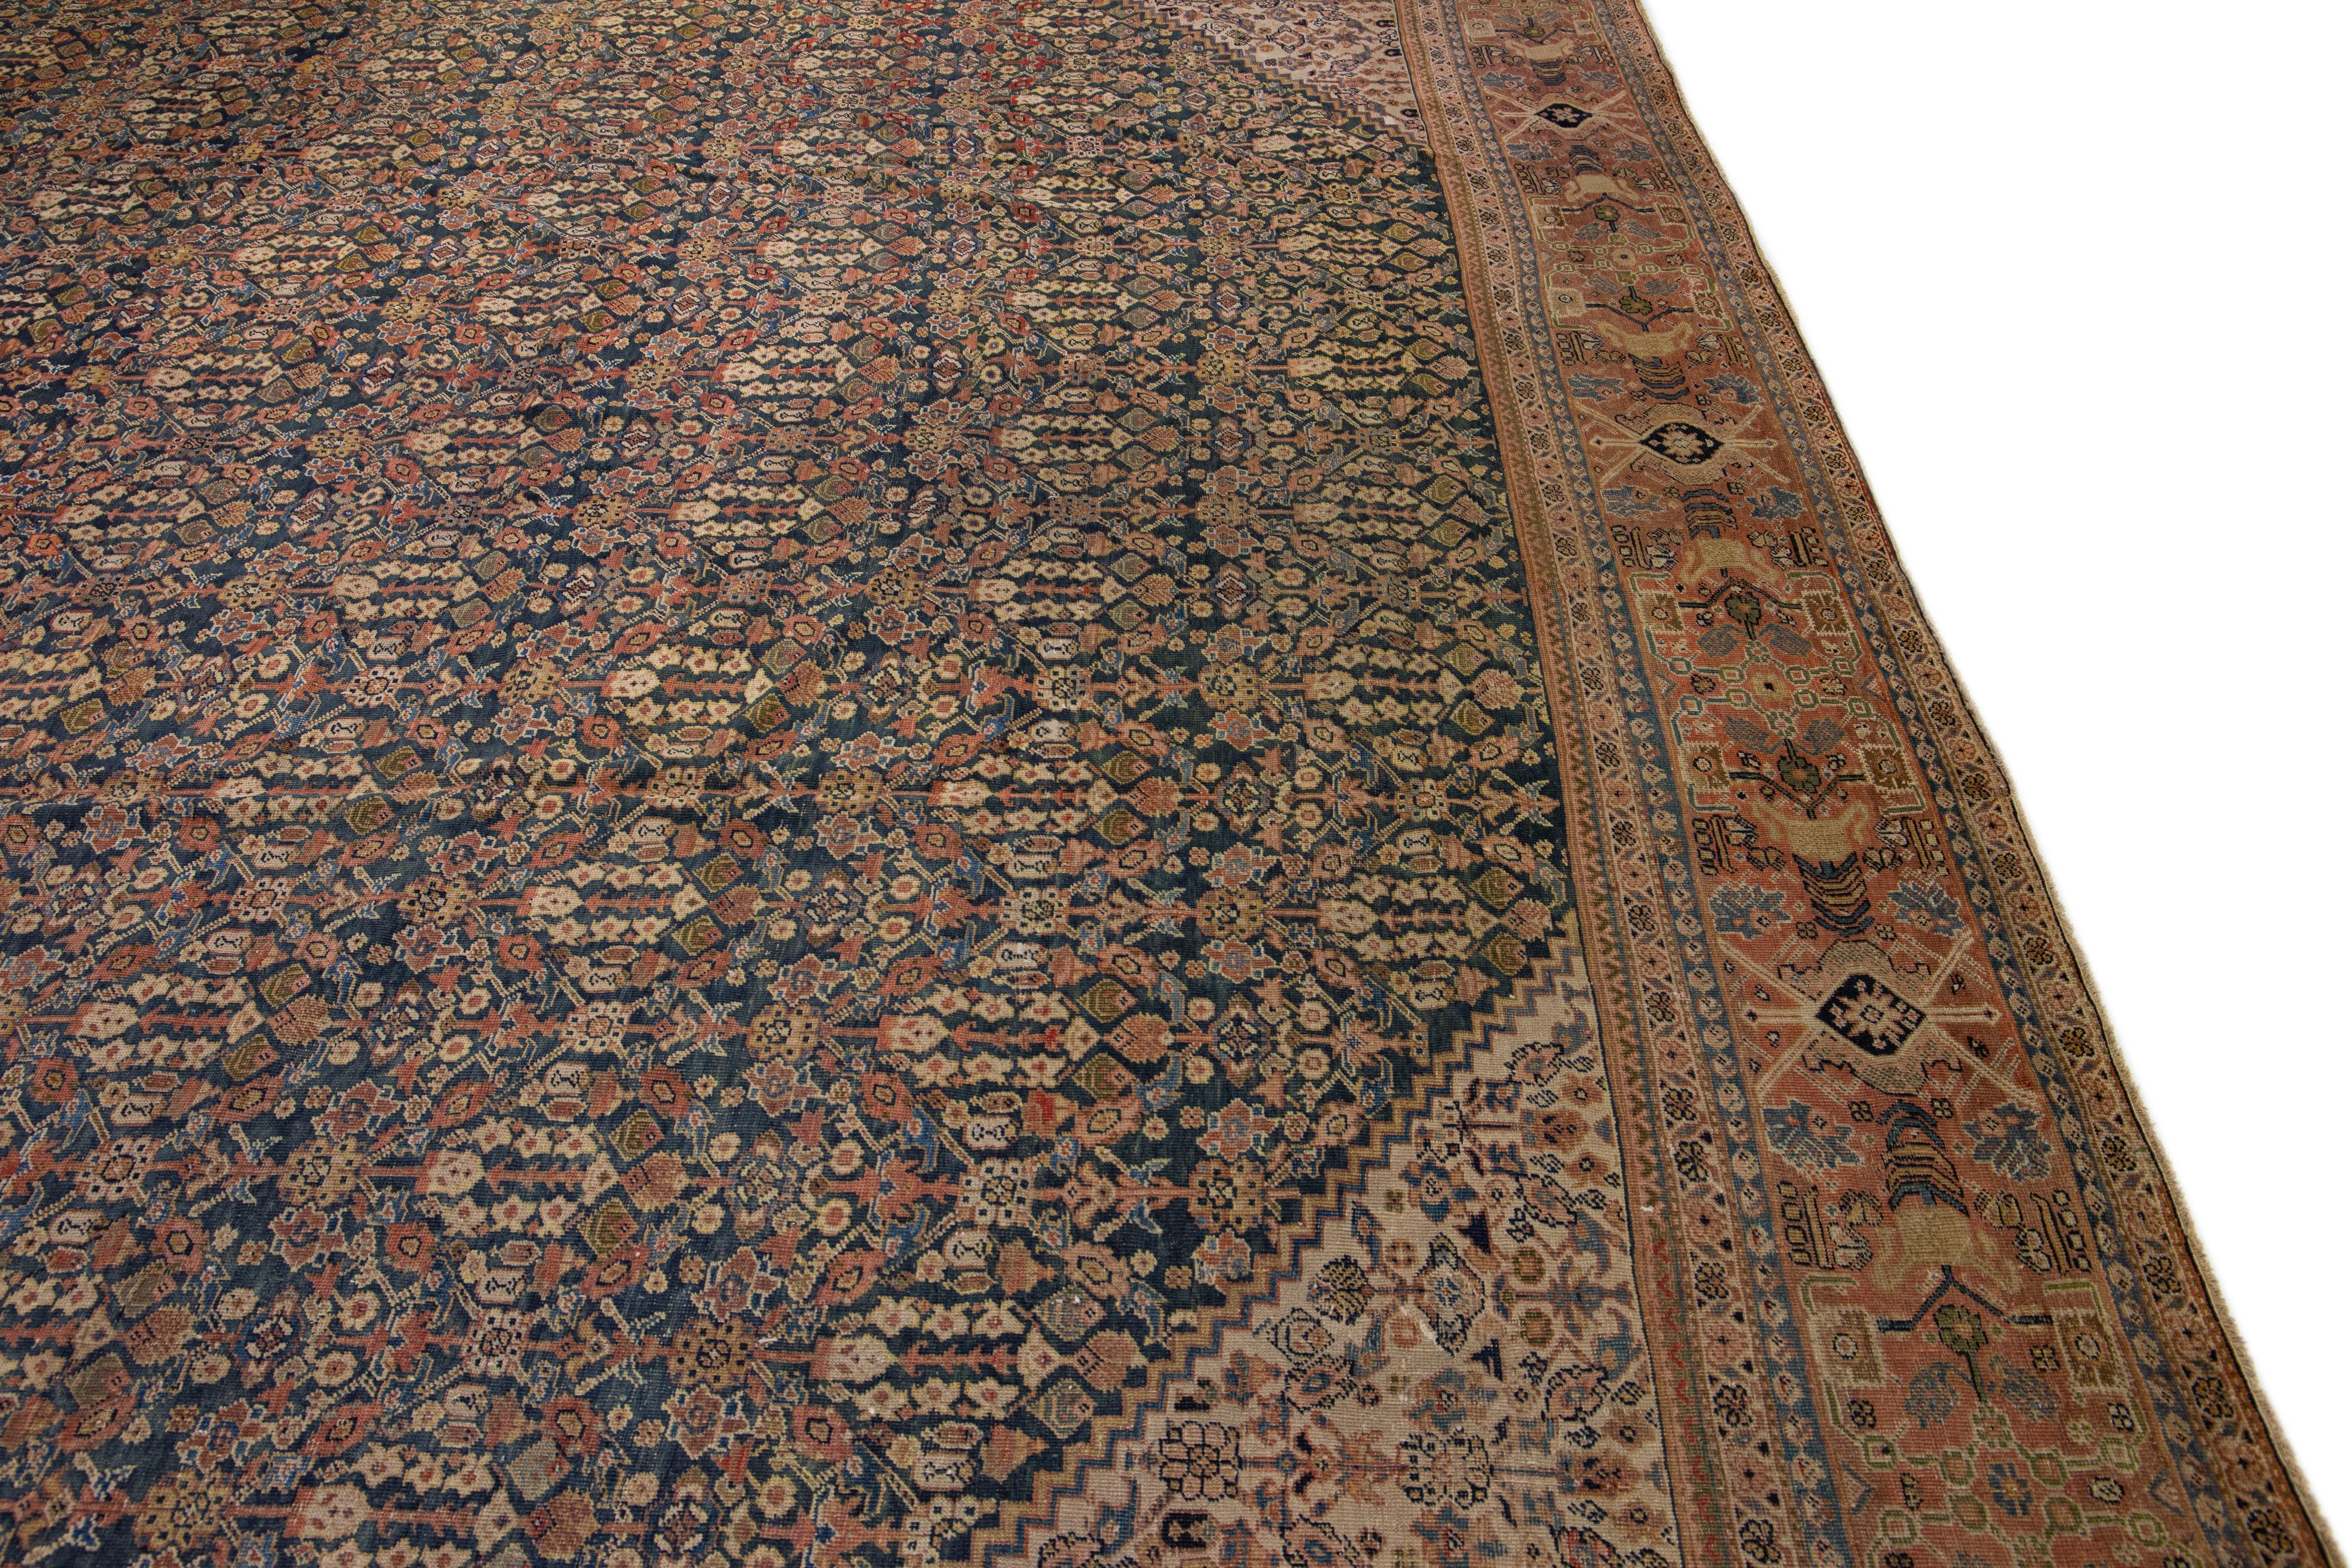 Antique Mahal Blue Handmade Oversize Wool Rug with Allover Motif In Good Condition For Sale In Norwalk, CT